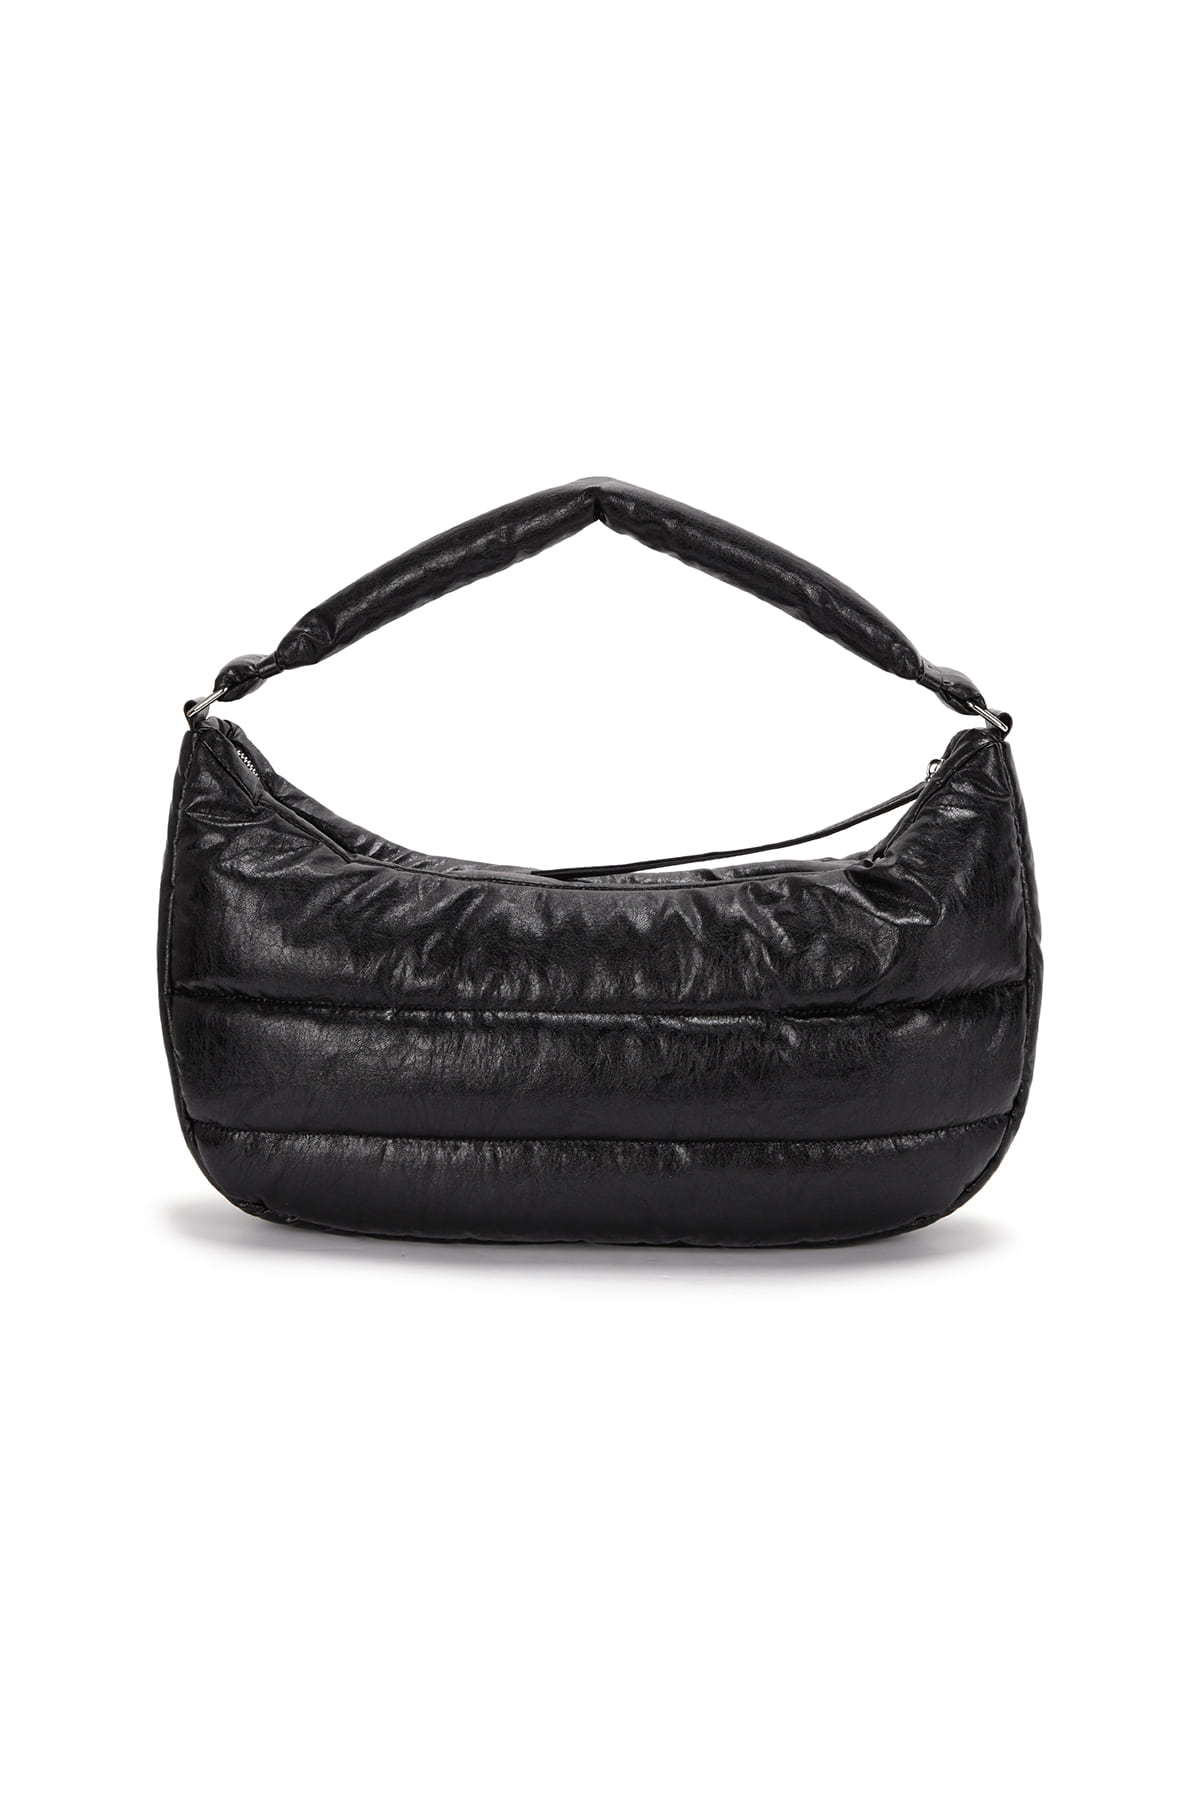 FAUX LEATHER HALF MOON PADDING BAG IN BLACK